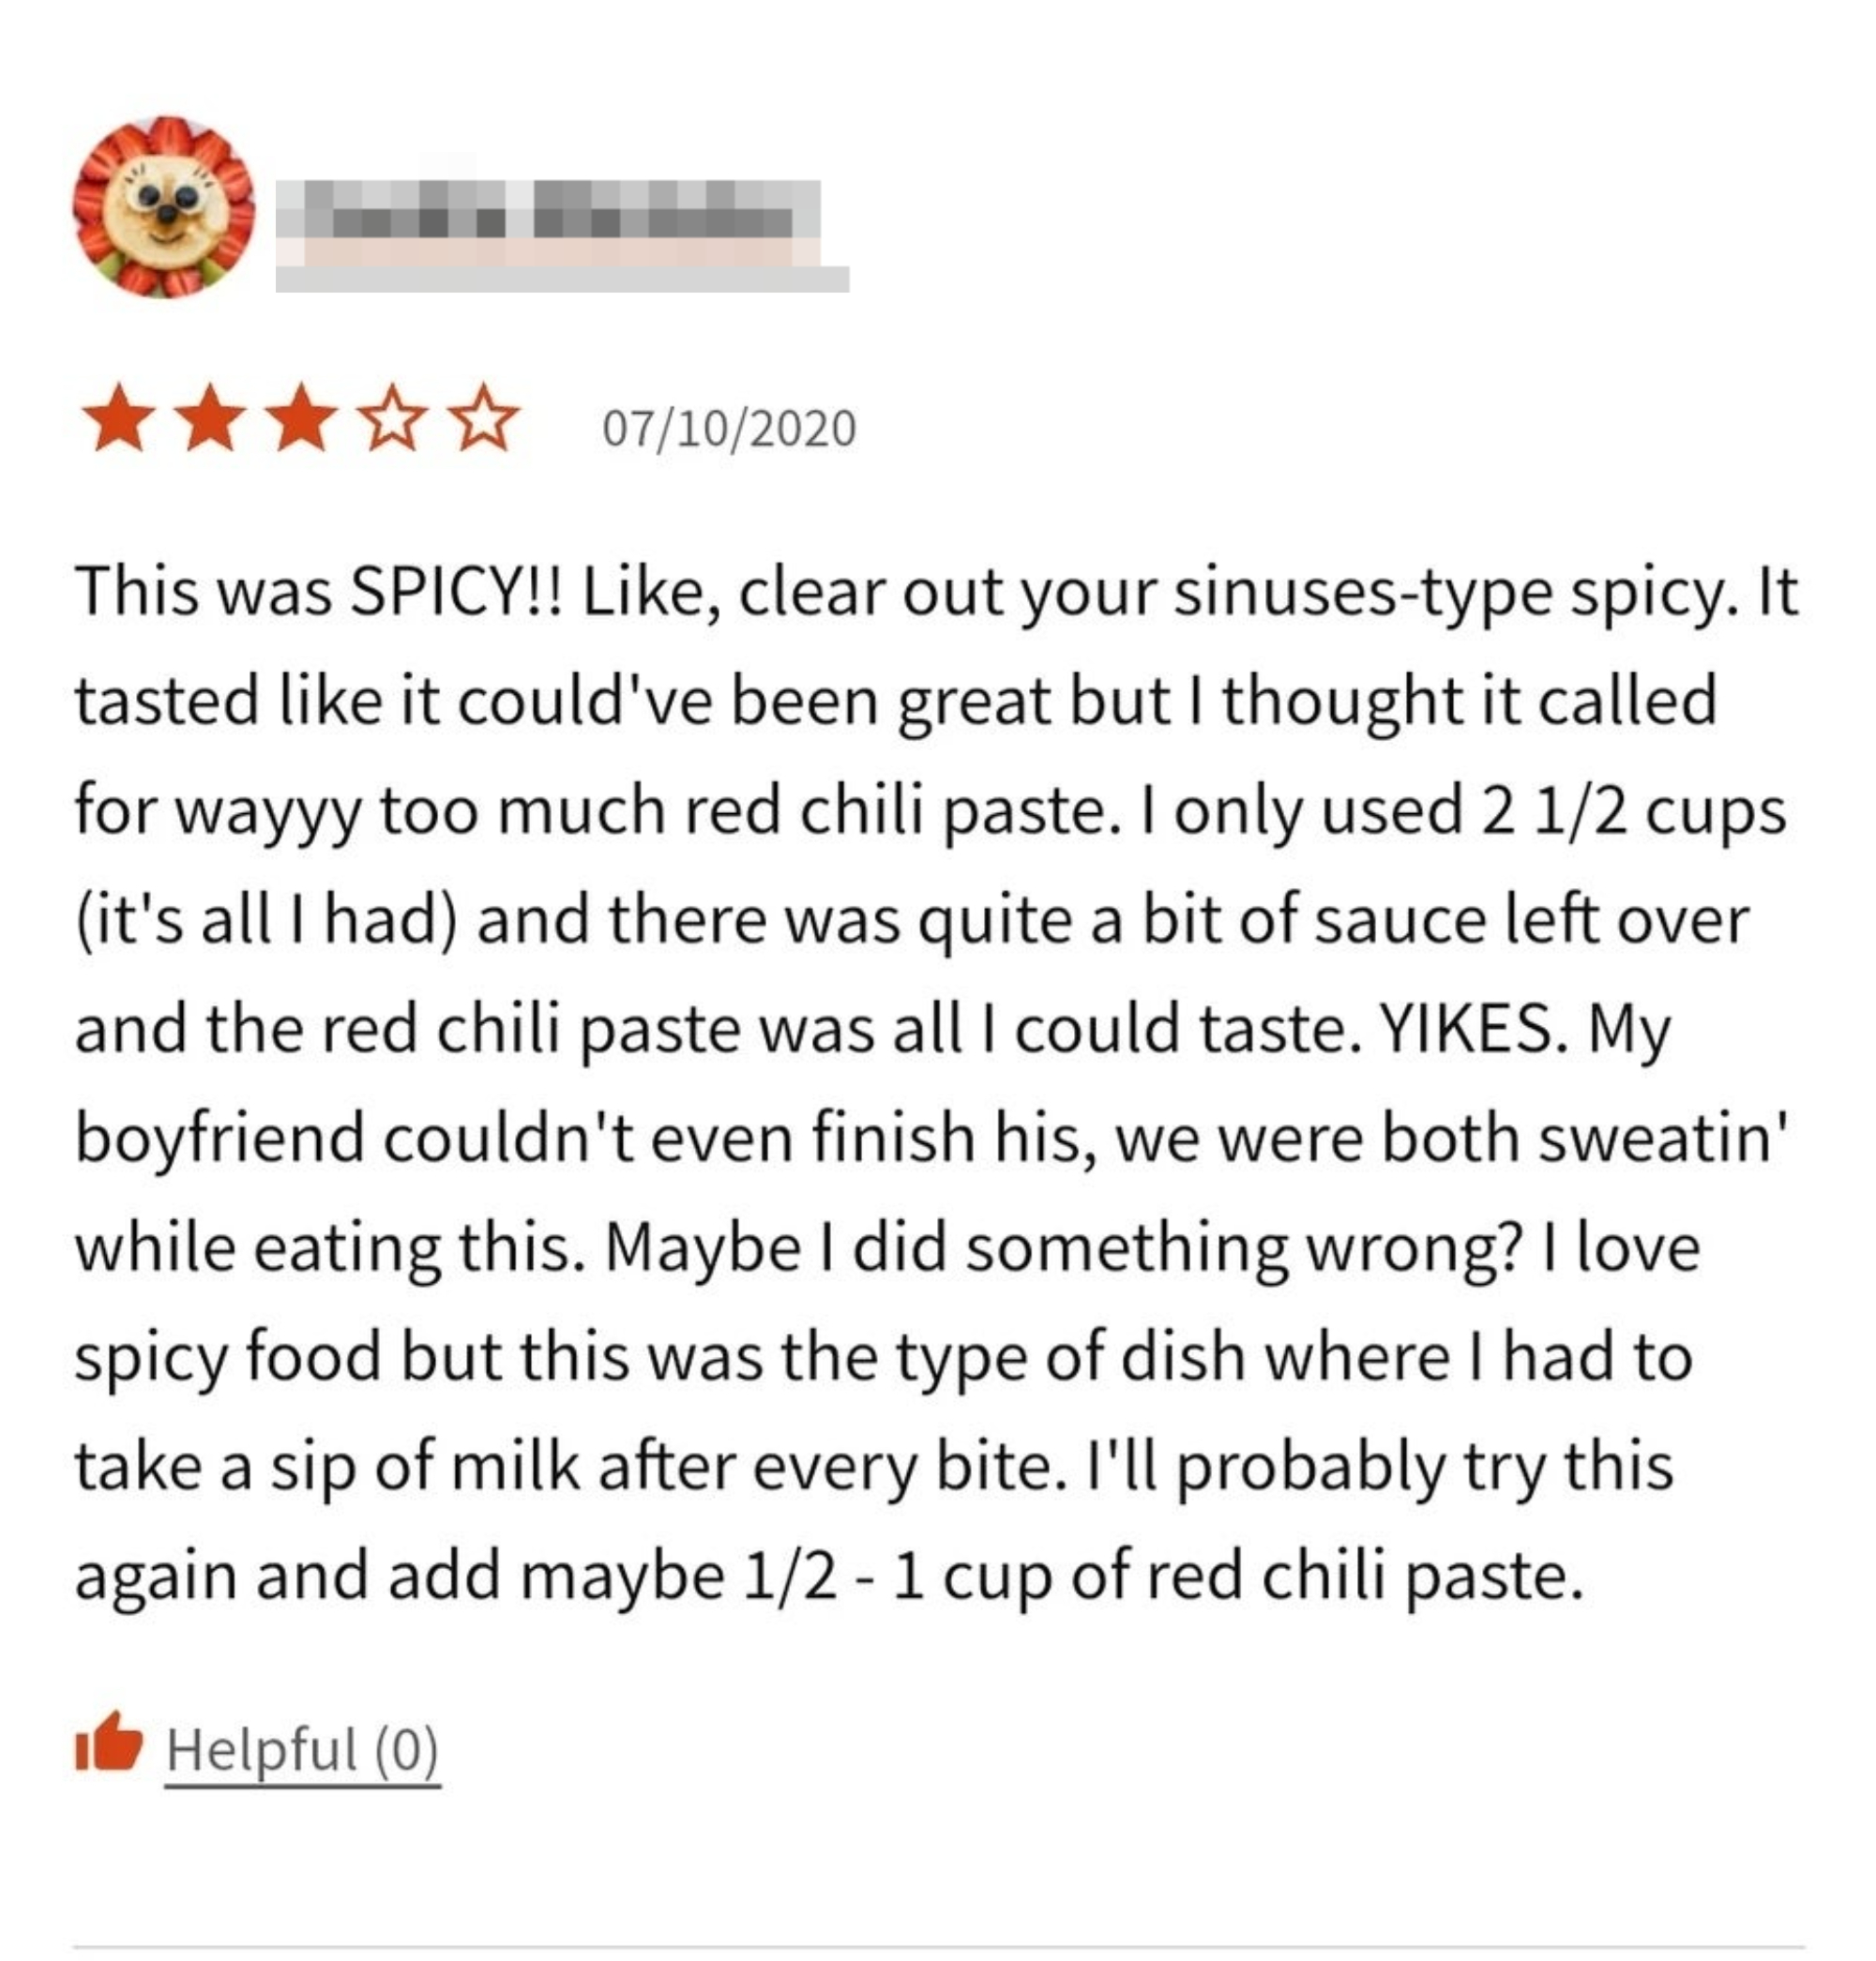 A negative review for a dish claiming it was too spicy from someone who used 2½ cups of chili paste